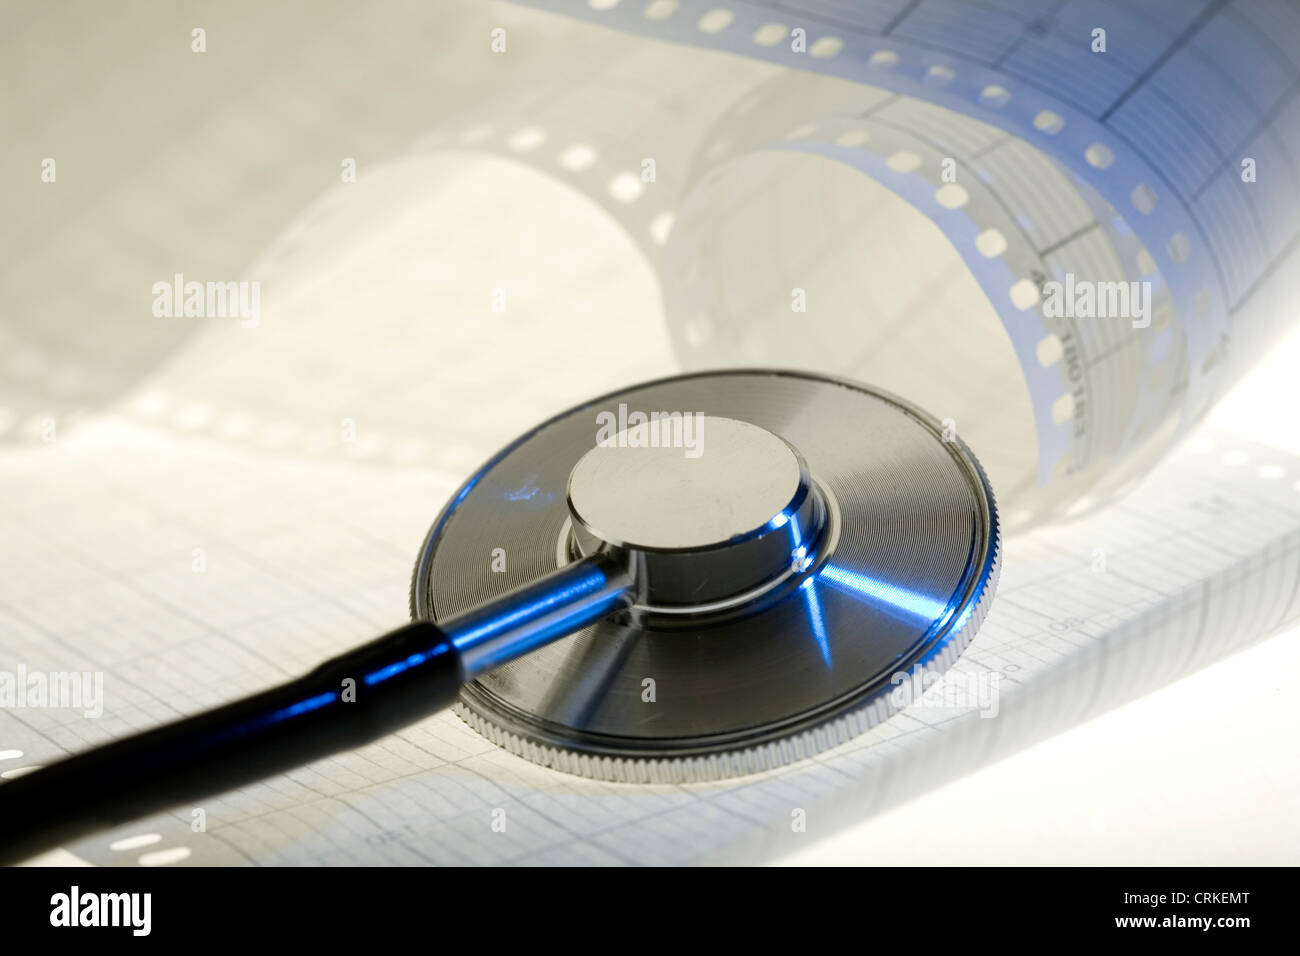 stethoscope with a electrocardiogram readout Stock Photo